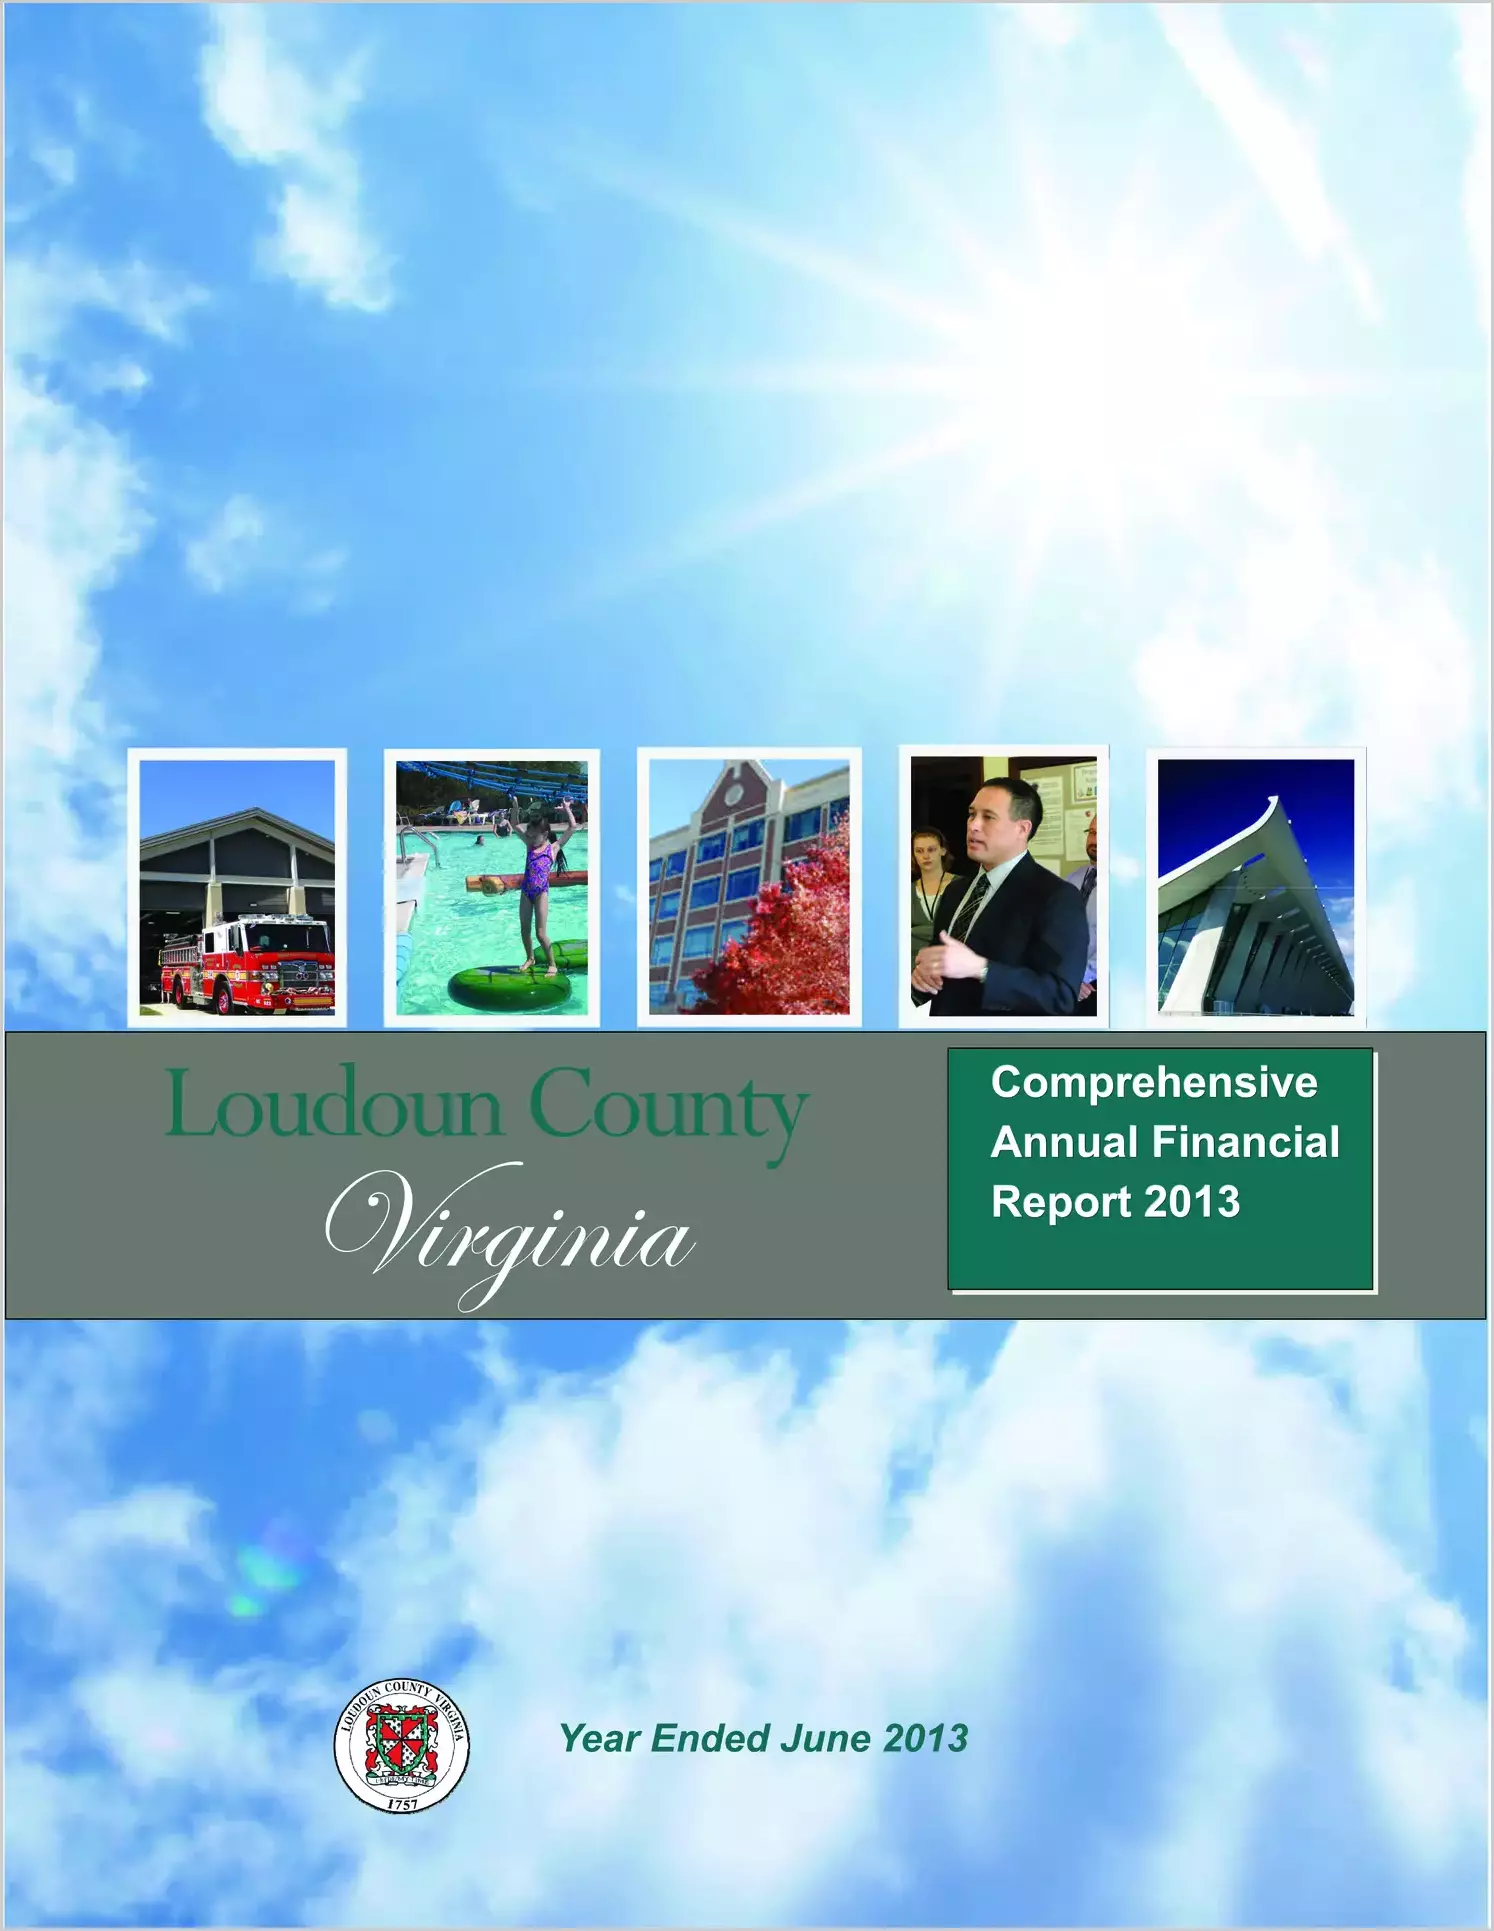 2013 Annual Financial Report for County of Loudoun